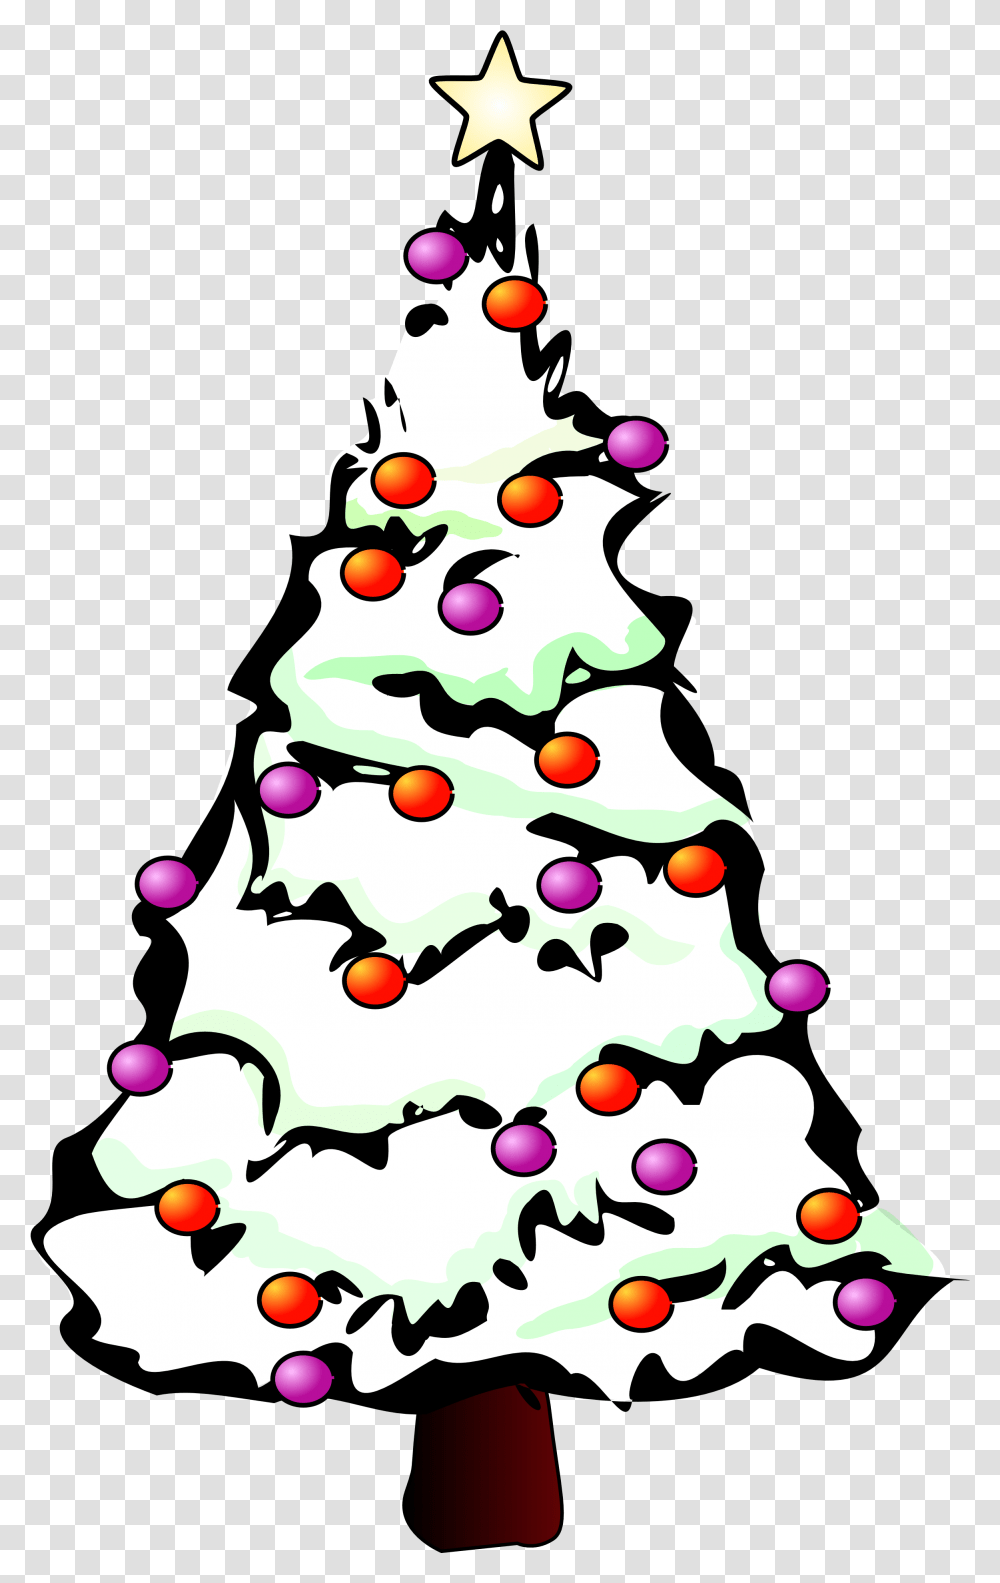 Free Charlie Brown Christmas Tree White Christmas Tree Drawing, Plant, Ornament, Star Symbol Transparent Png